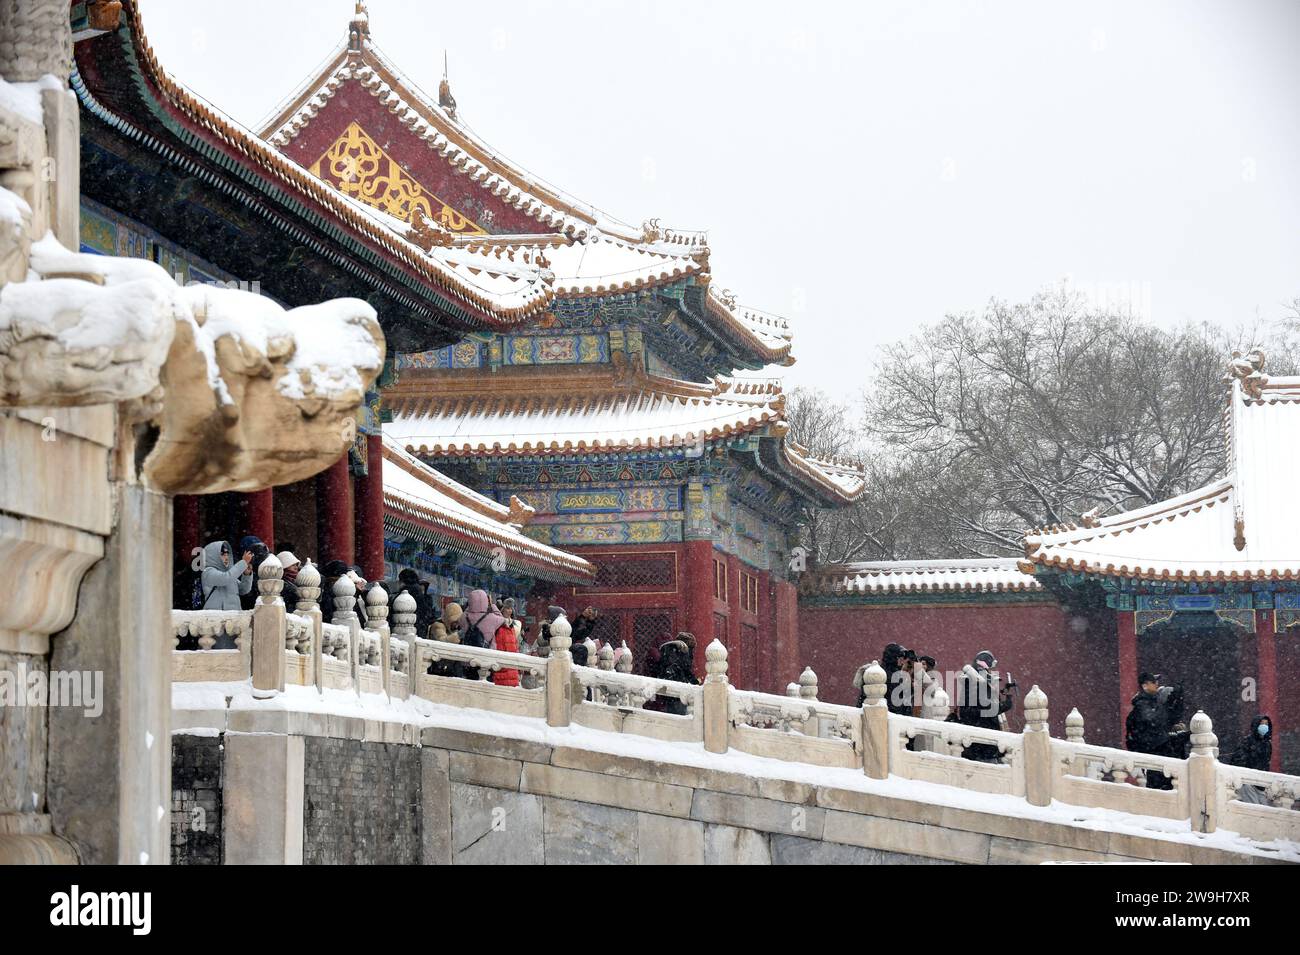 (231228) -- BEIJING, Dec. 28, 2023 (Xinhua) -- Visitors enjoy snow scenery at the Palace Museum in Beijing, capital of China, Dec. 14, 2023.  First created in the Yuan Dynasty (1271-1368), the Beijing Central Axis, or Zhongzhouxian, stretches 7.8 kilometers between the Yongding Gate in the south of the city and the Drum Tower and Bell Tower in the north. Most of the major old-city buildings of Beijing sit along this axis.   Gates, palaces, temples, squares and gardens of the old city are all linked up to the axis. As they witnessed the folk activities along the line from old days to new ones, Stock Photo